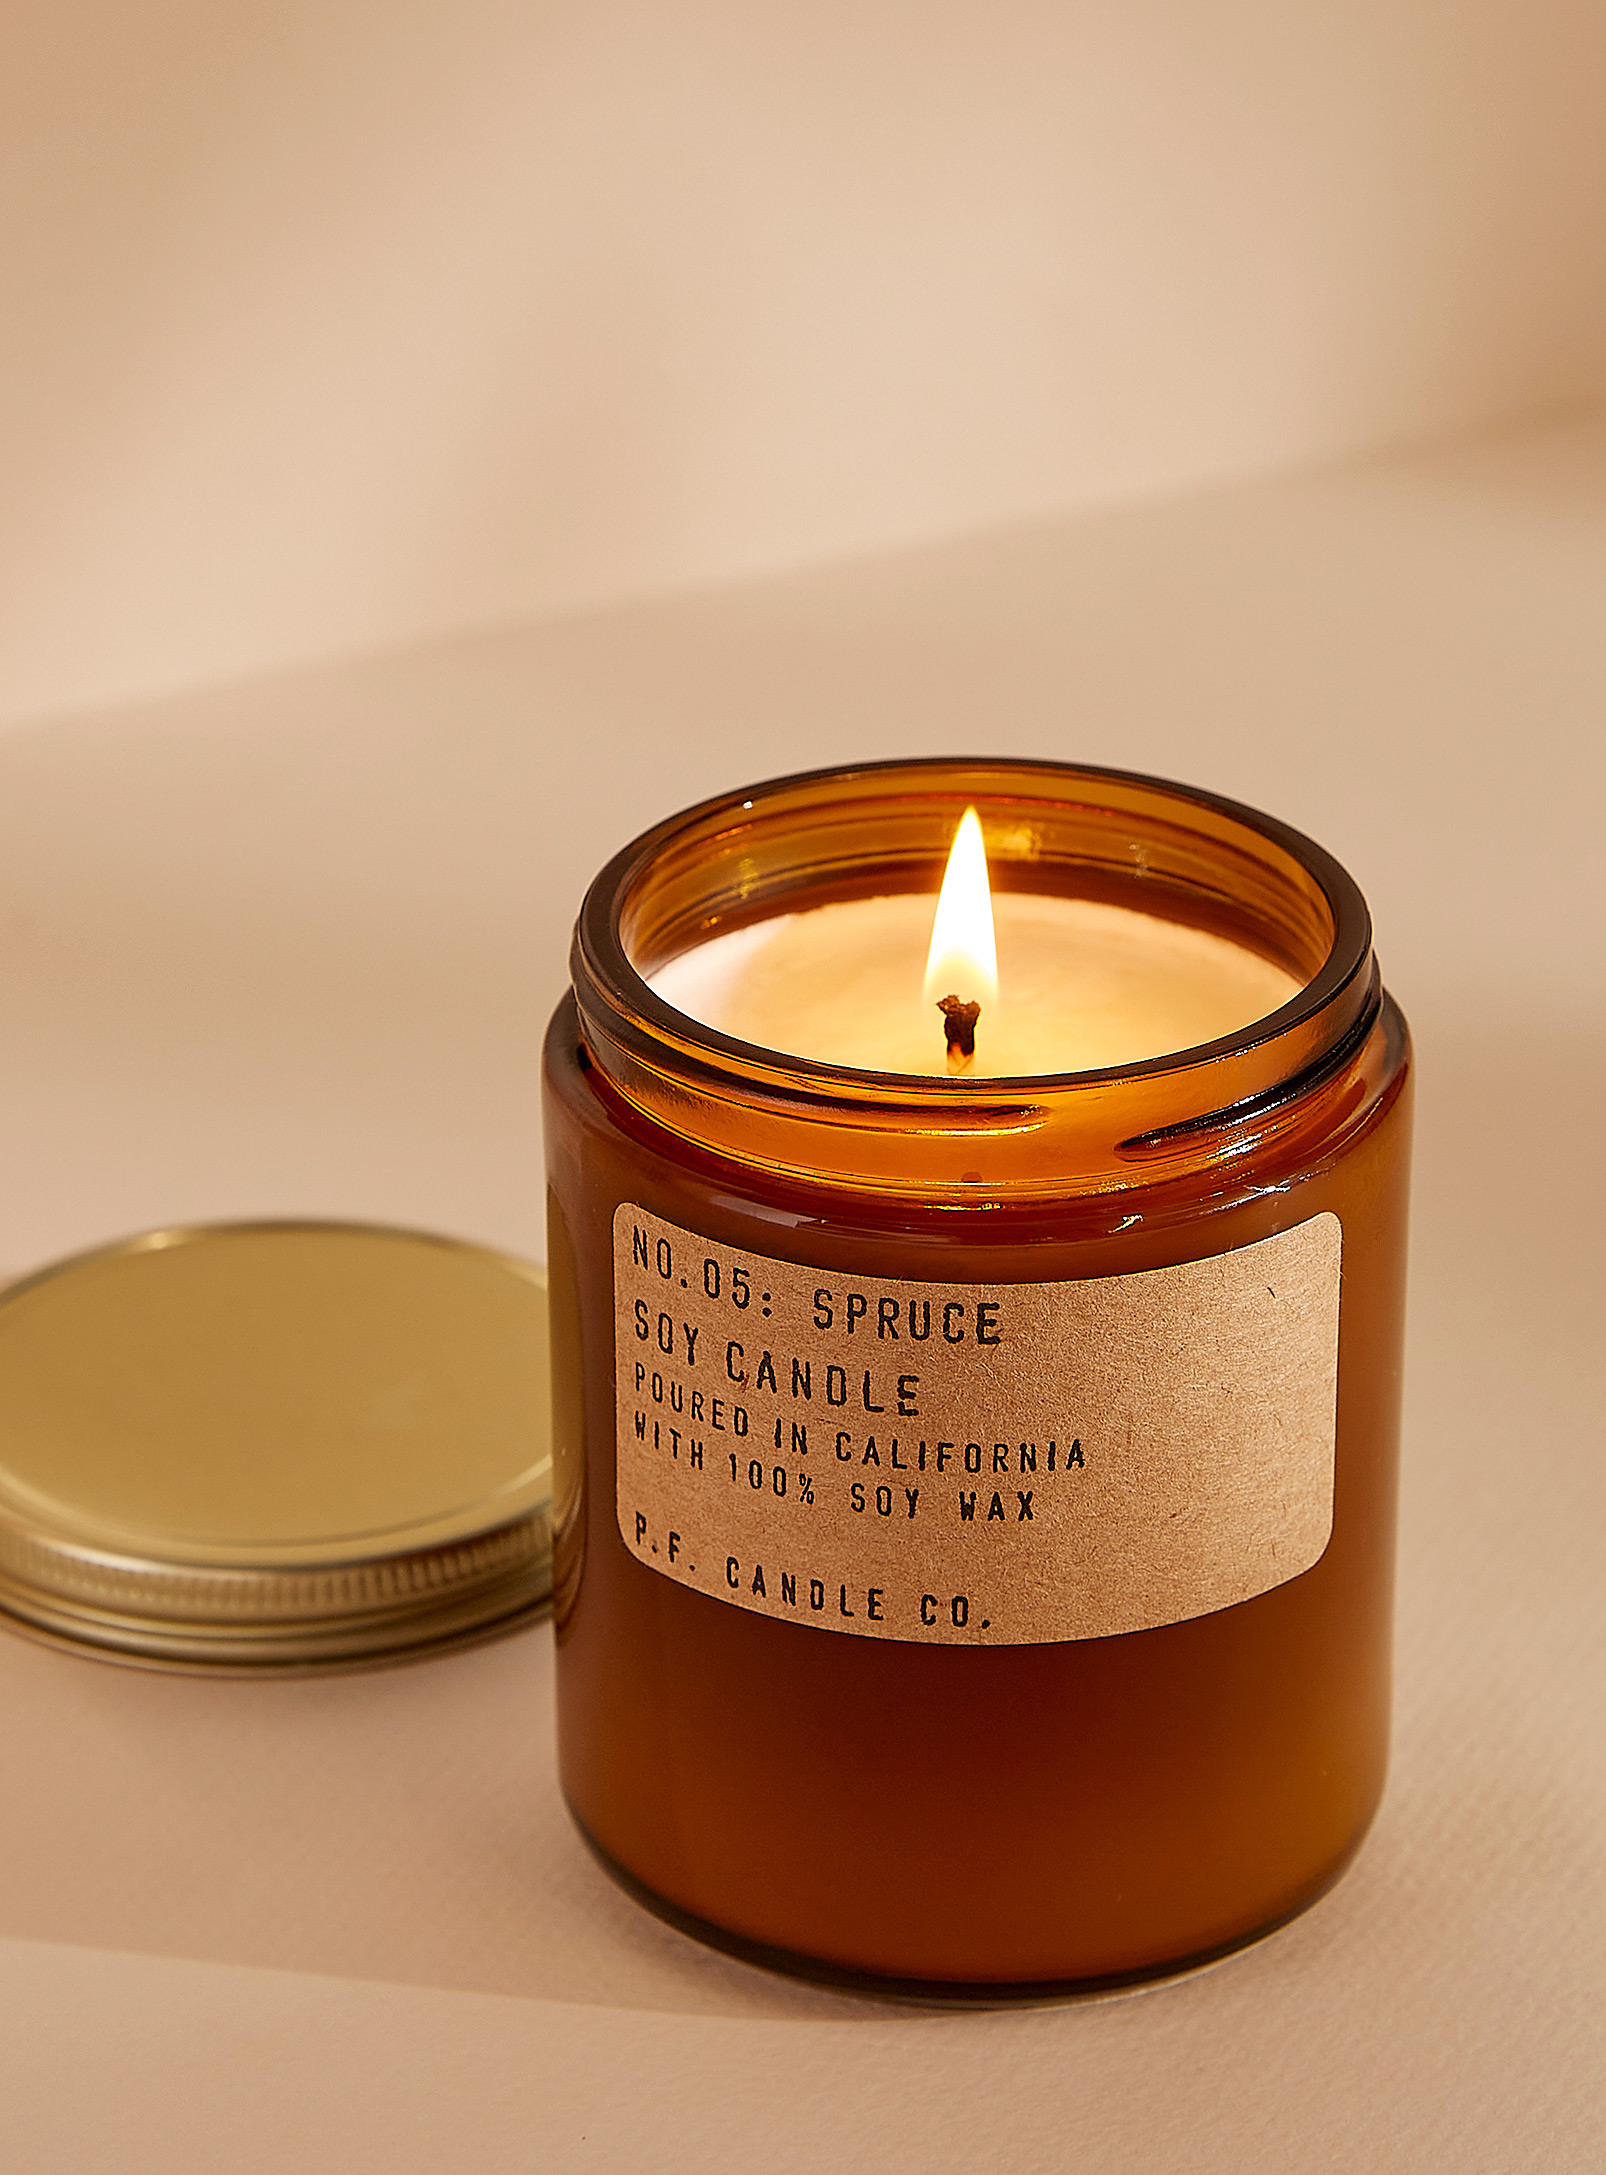 P.F. Candle Co. - Spruce candle